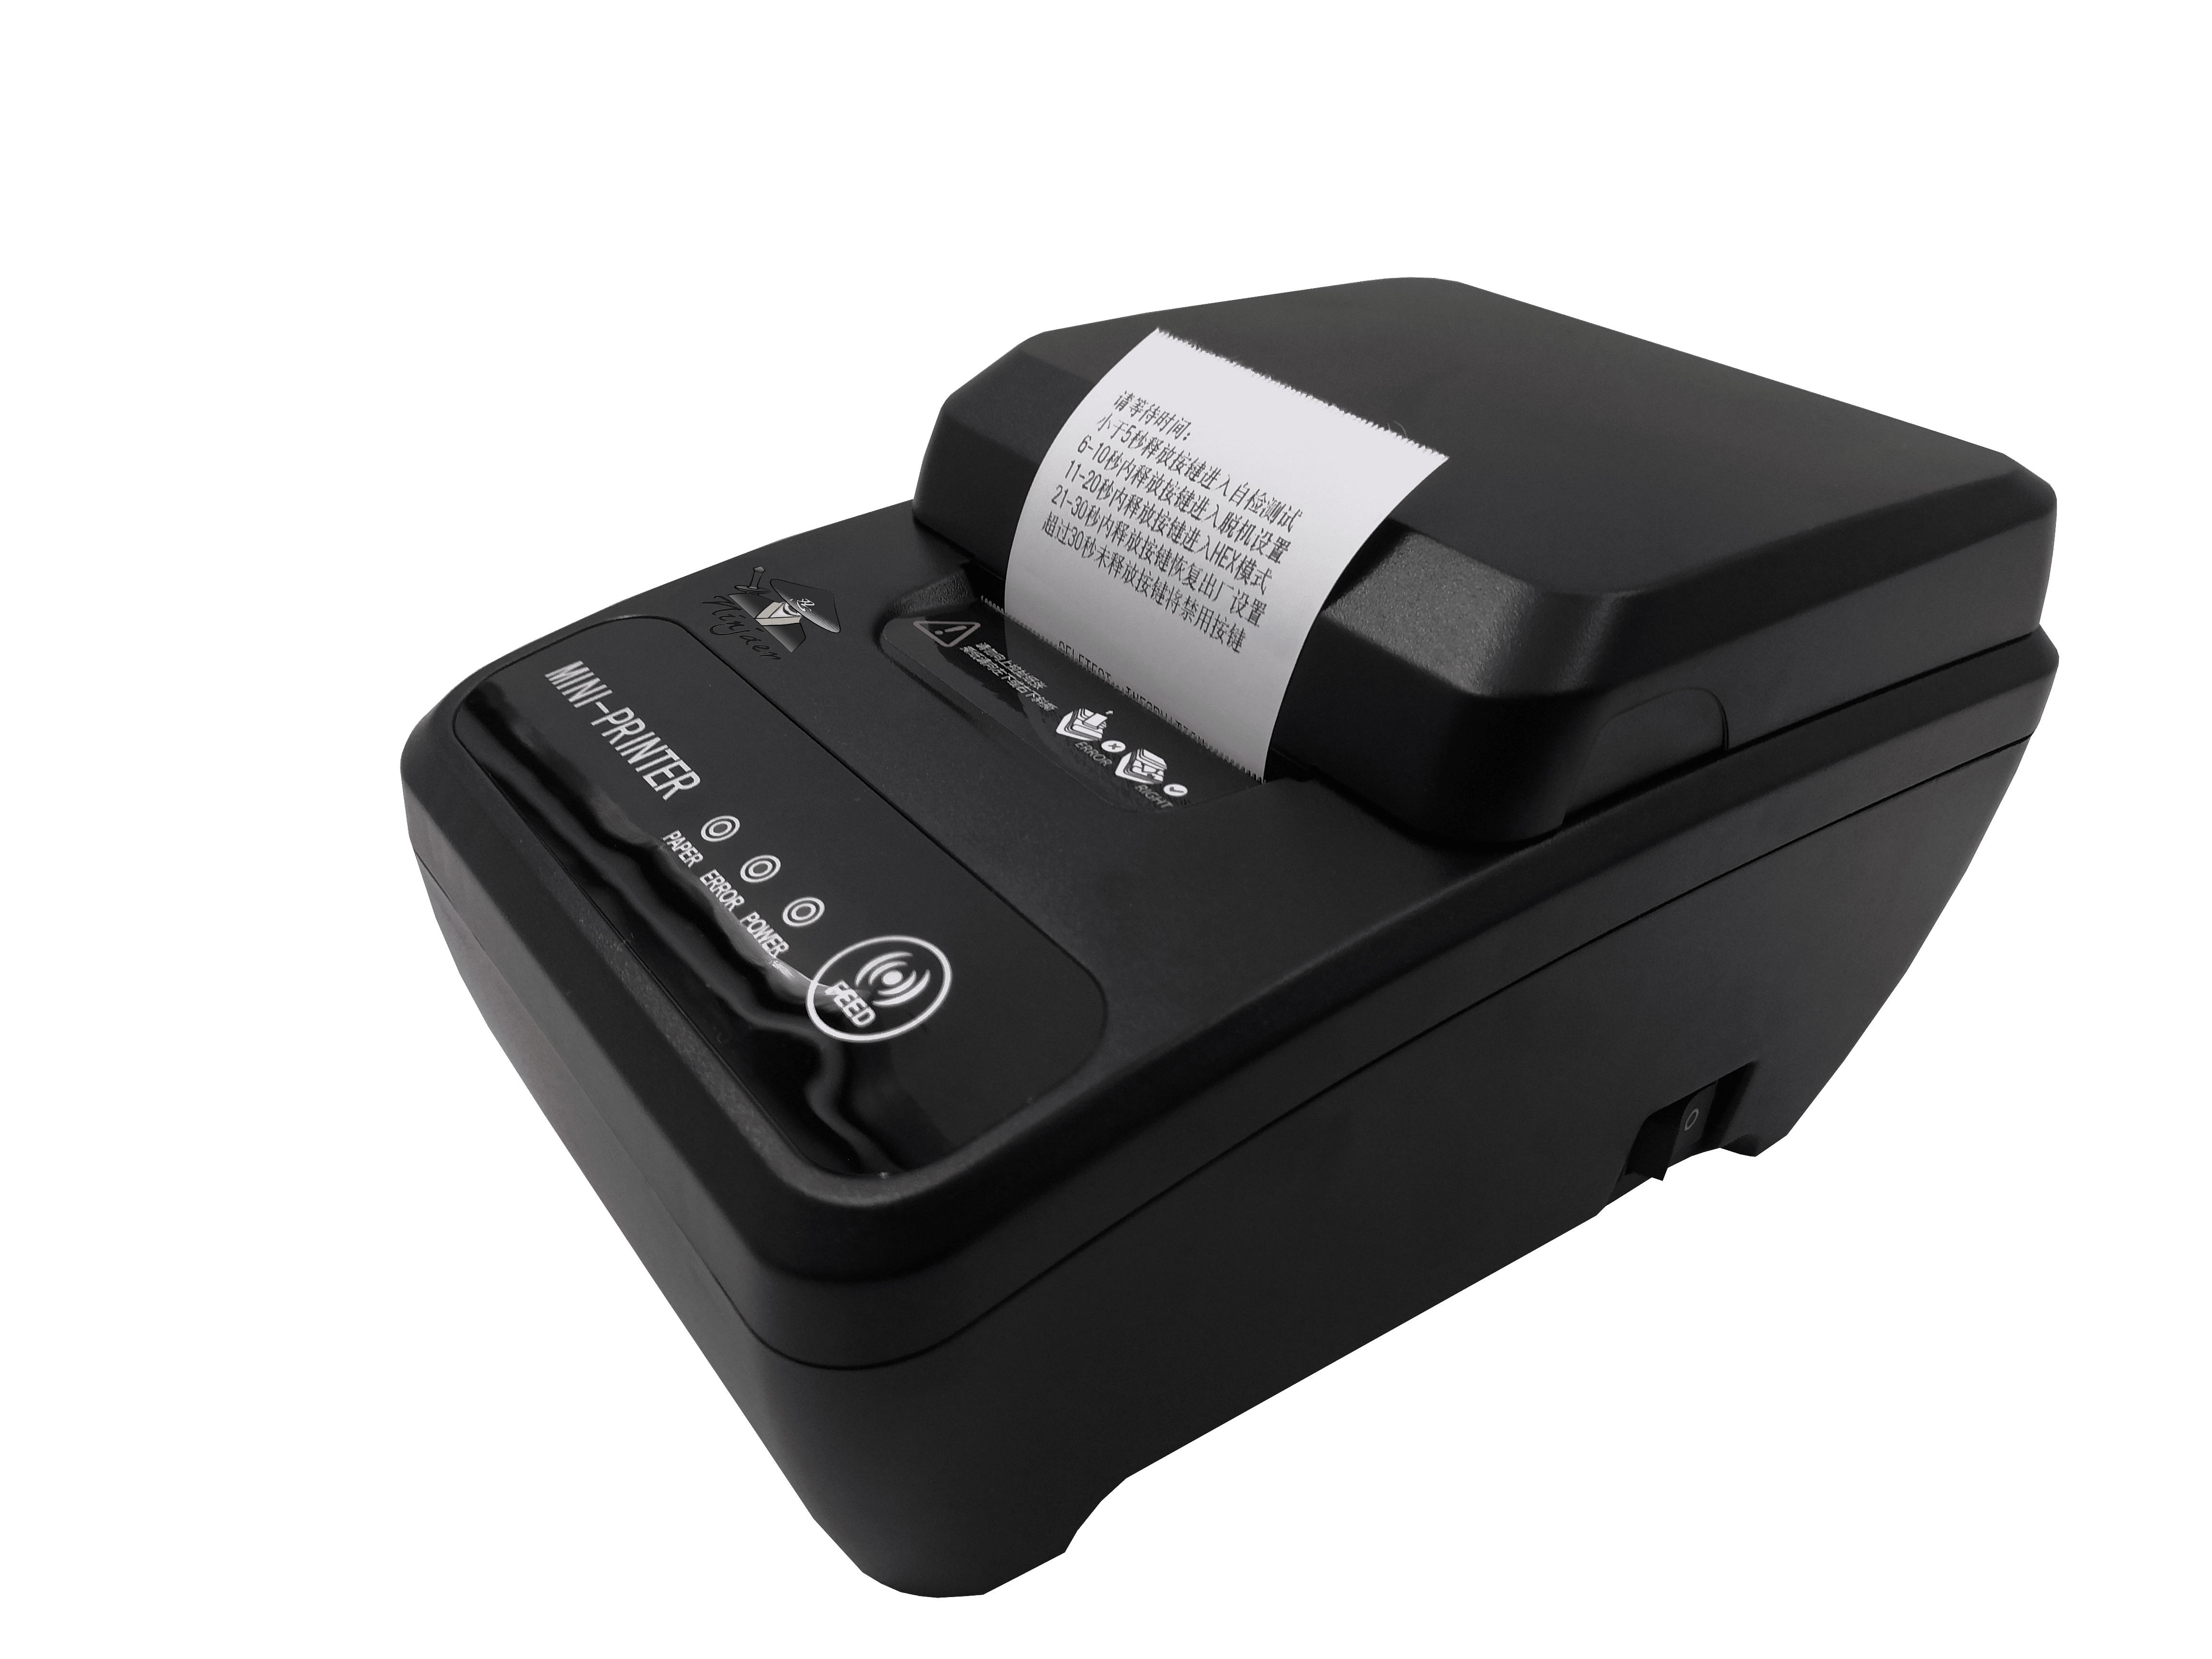 China Factory for Durable Barcode Ribbon - 58mm Direct Thermal Receipt Printer EC-5890III with USB/USB+RS232 Serial/IEEE1284-A unidirectional parallel/Bluetooth is used for Win 9X/Win ME/Win 2000/Win 2003/Win NT/Win XP/Win Vista/win 7/Win 8/Win 8.1/ Linux/ OPOS/Win 10/Apple – NINJAER detail pictures